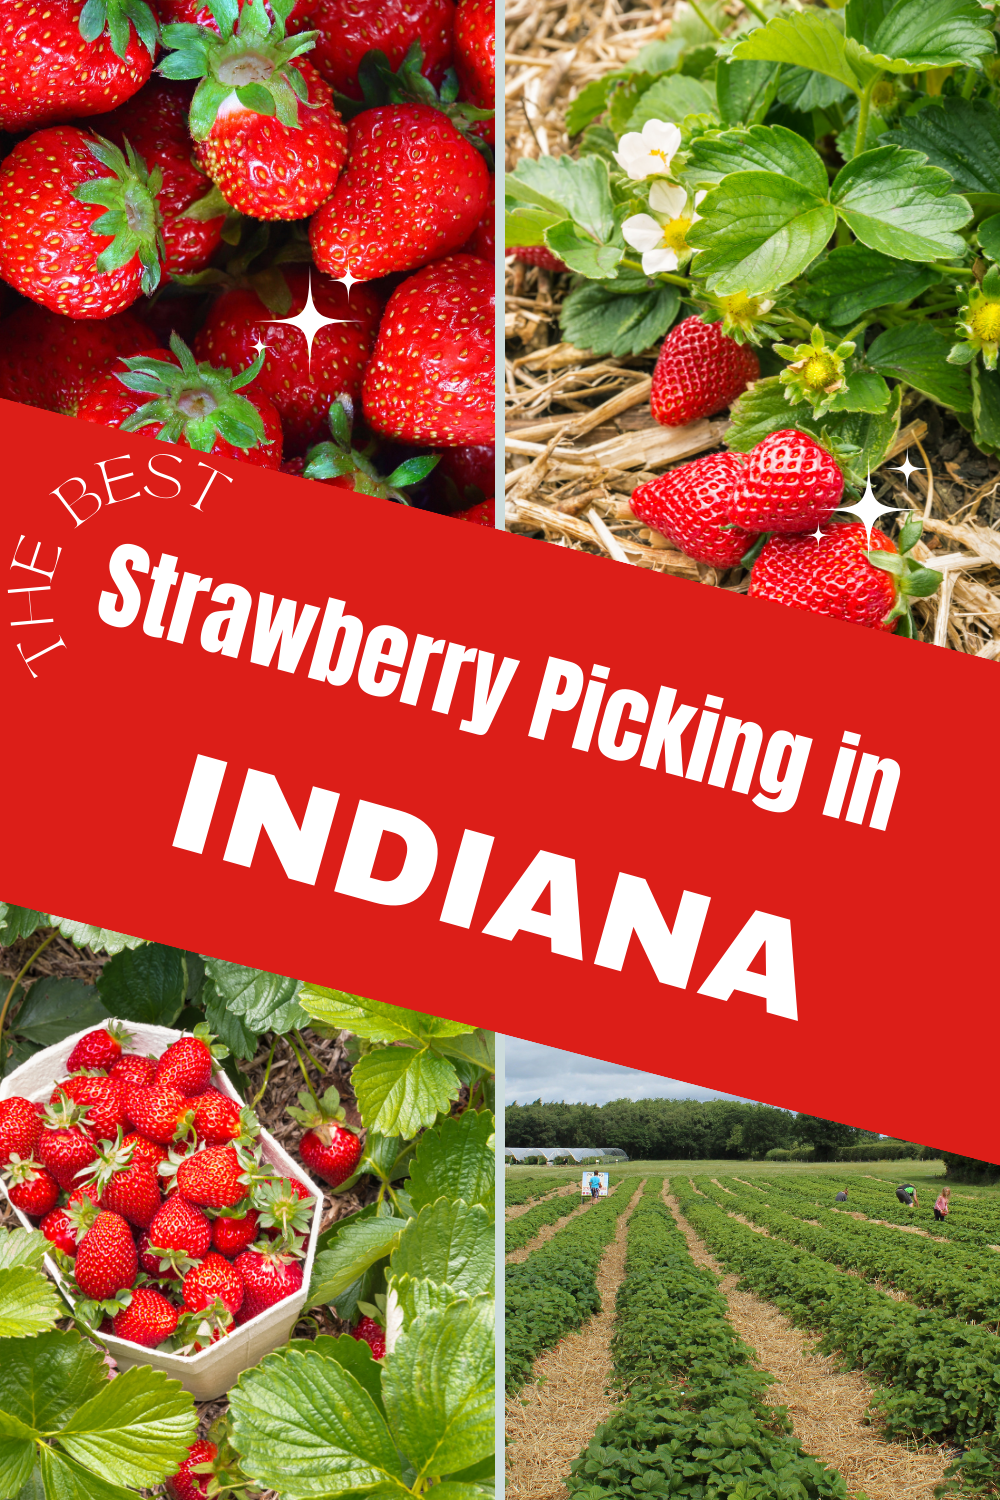 Best Strawberry Picking Farms in Indiana